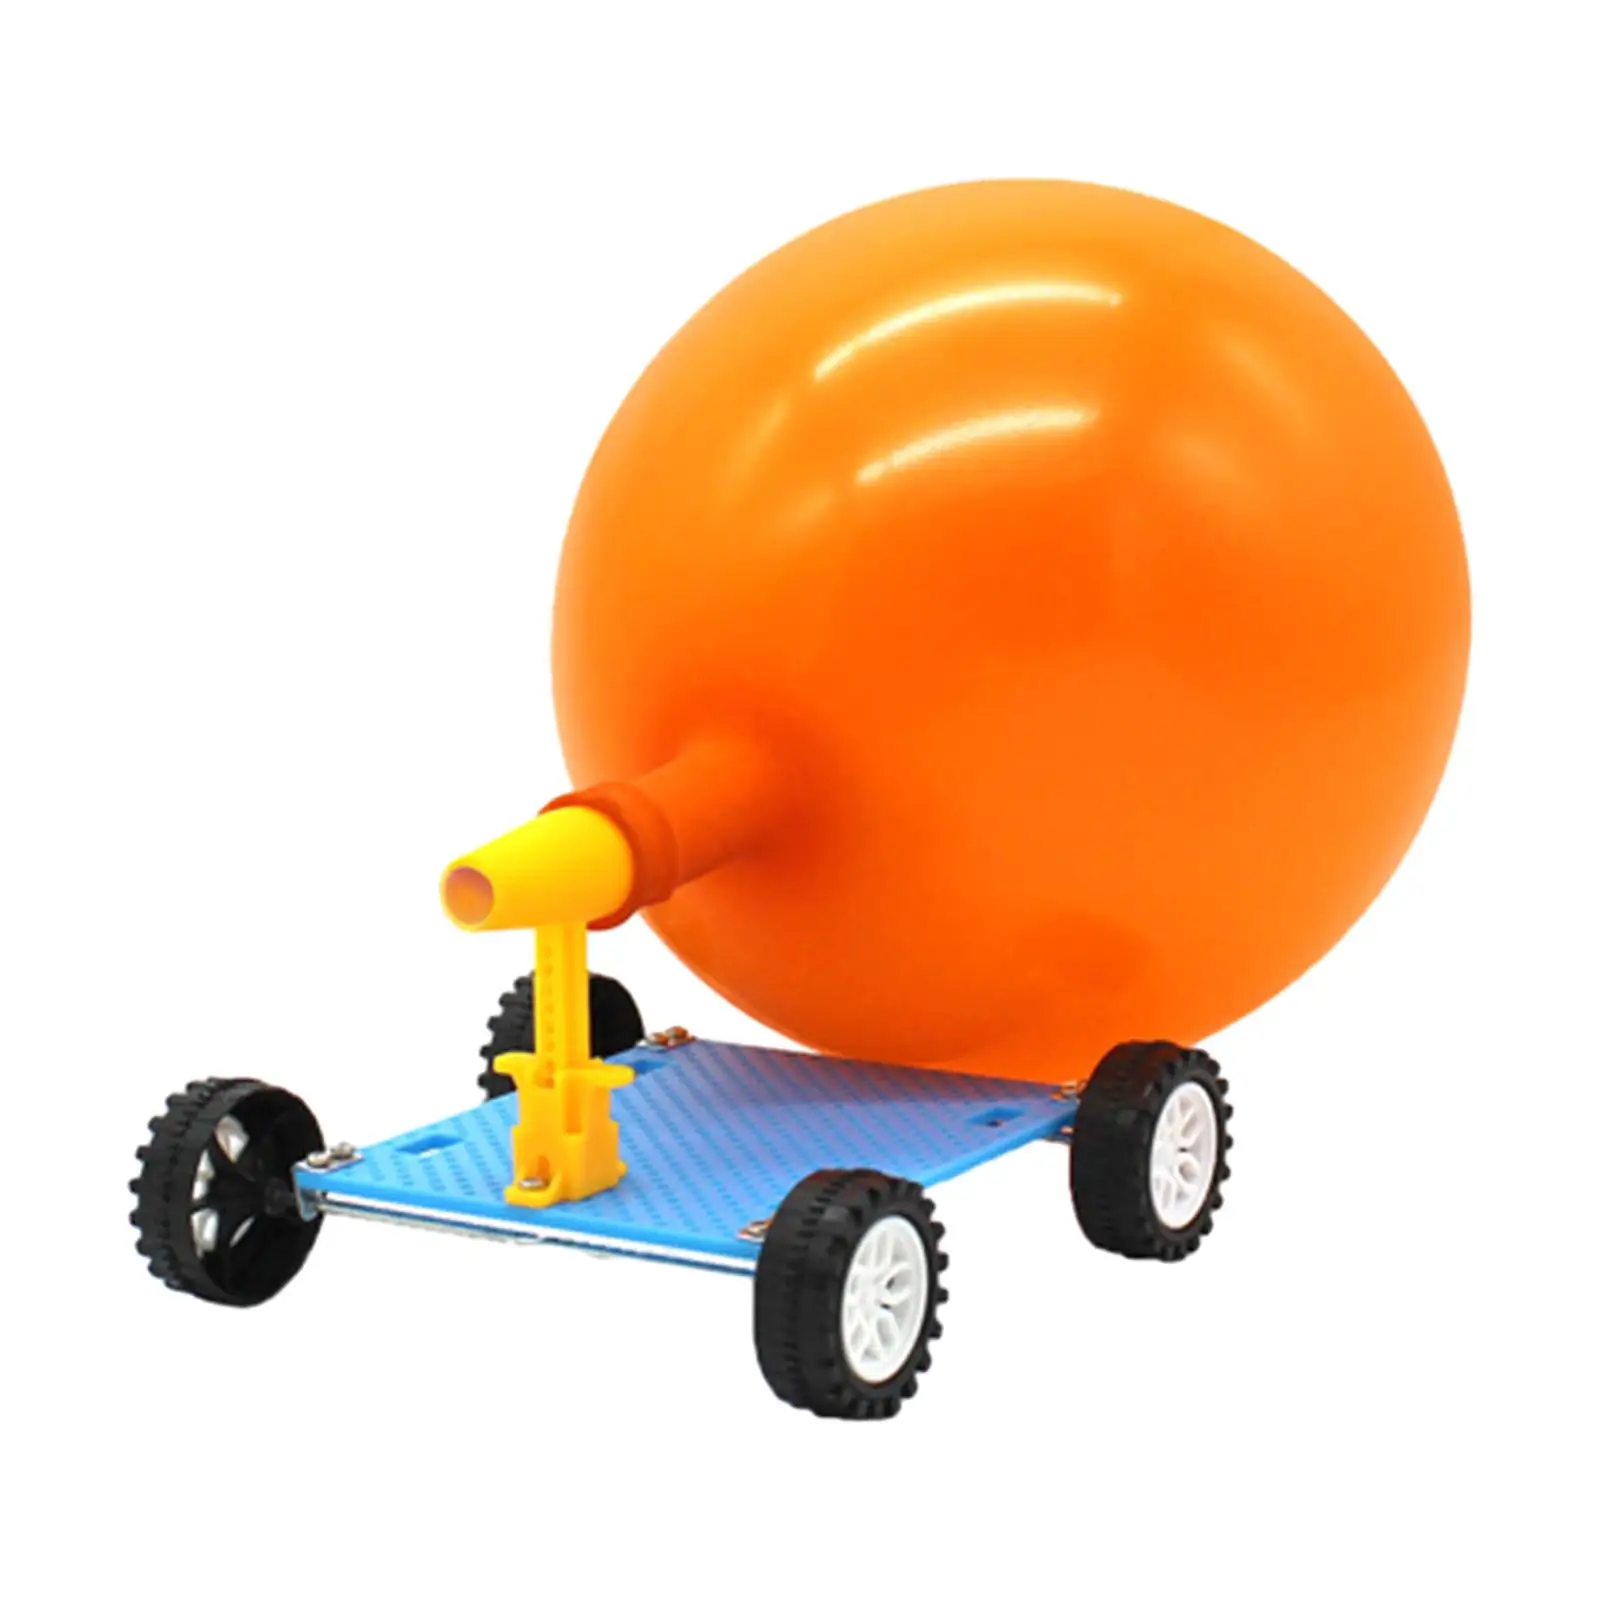 

DIY Balloon Car Racer Educational Toy Assembly 3D Puzzles, Handicrafts, Scientific Balloon Powered Car for Kids Boy Girls